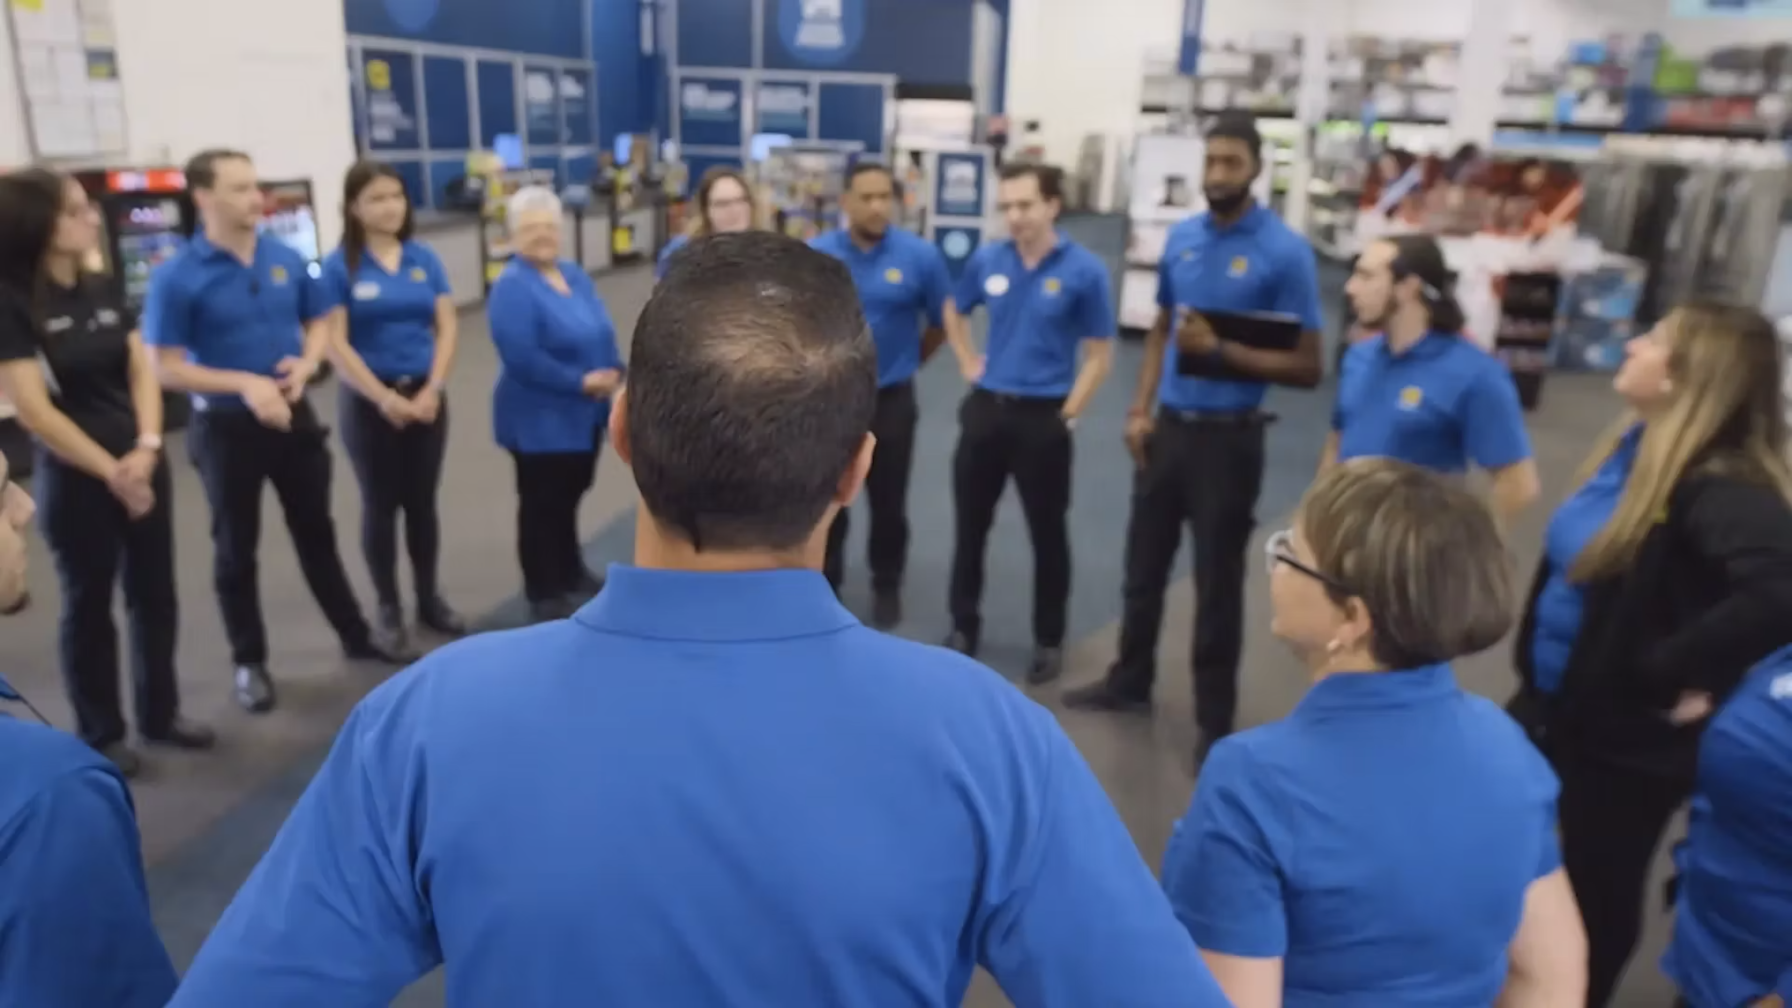 How old do you have to be to work at Best Buy?